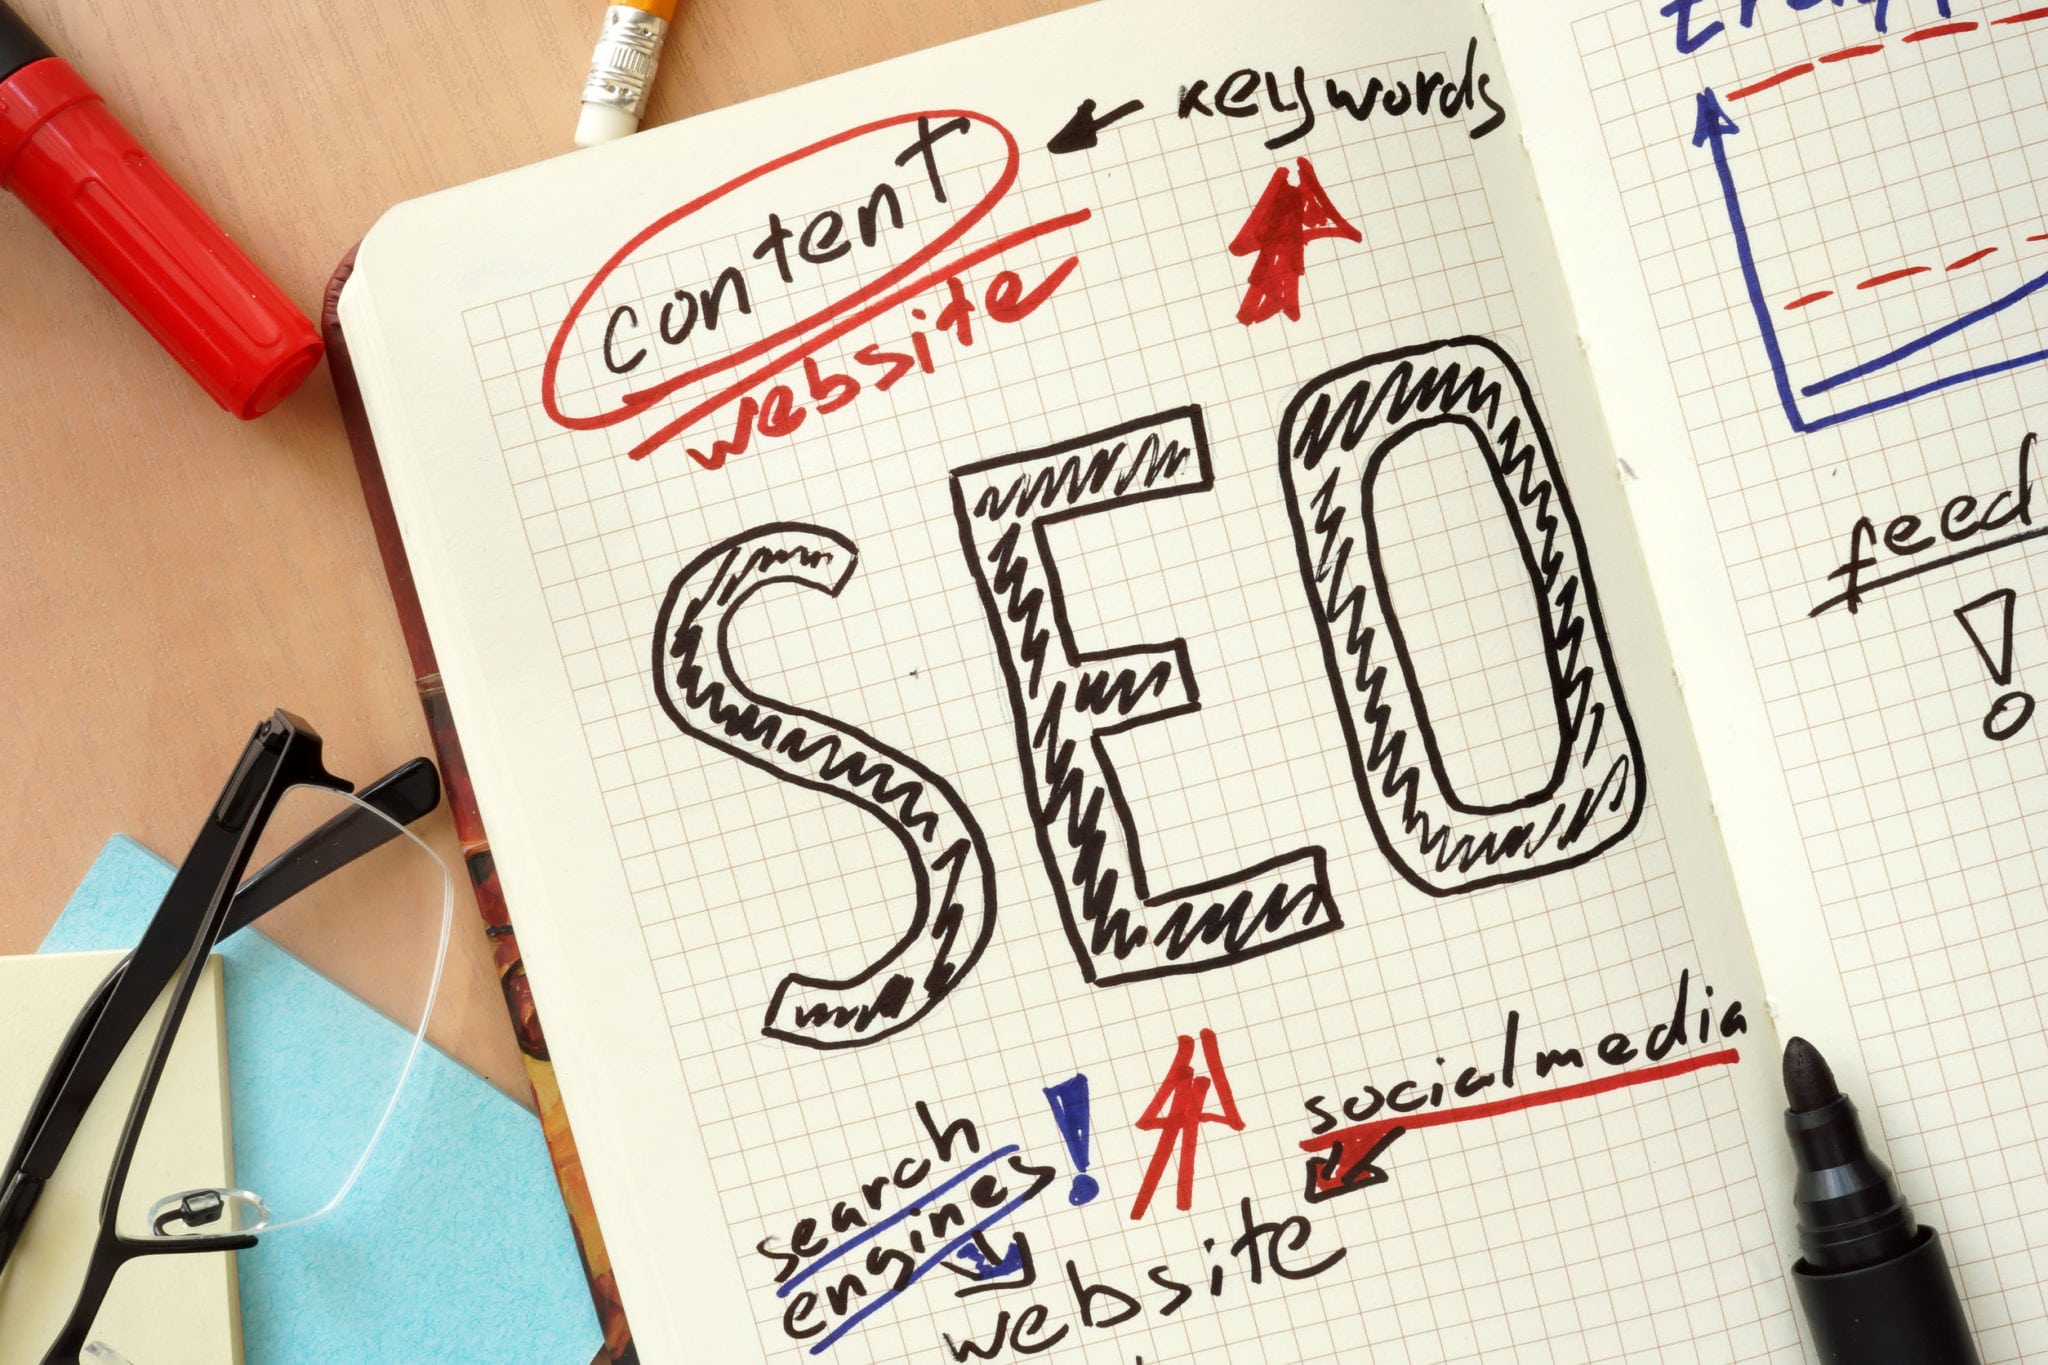 SEO and content